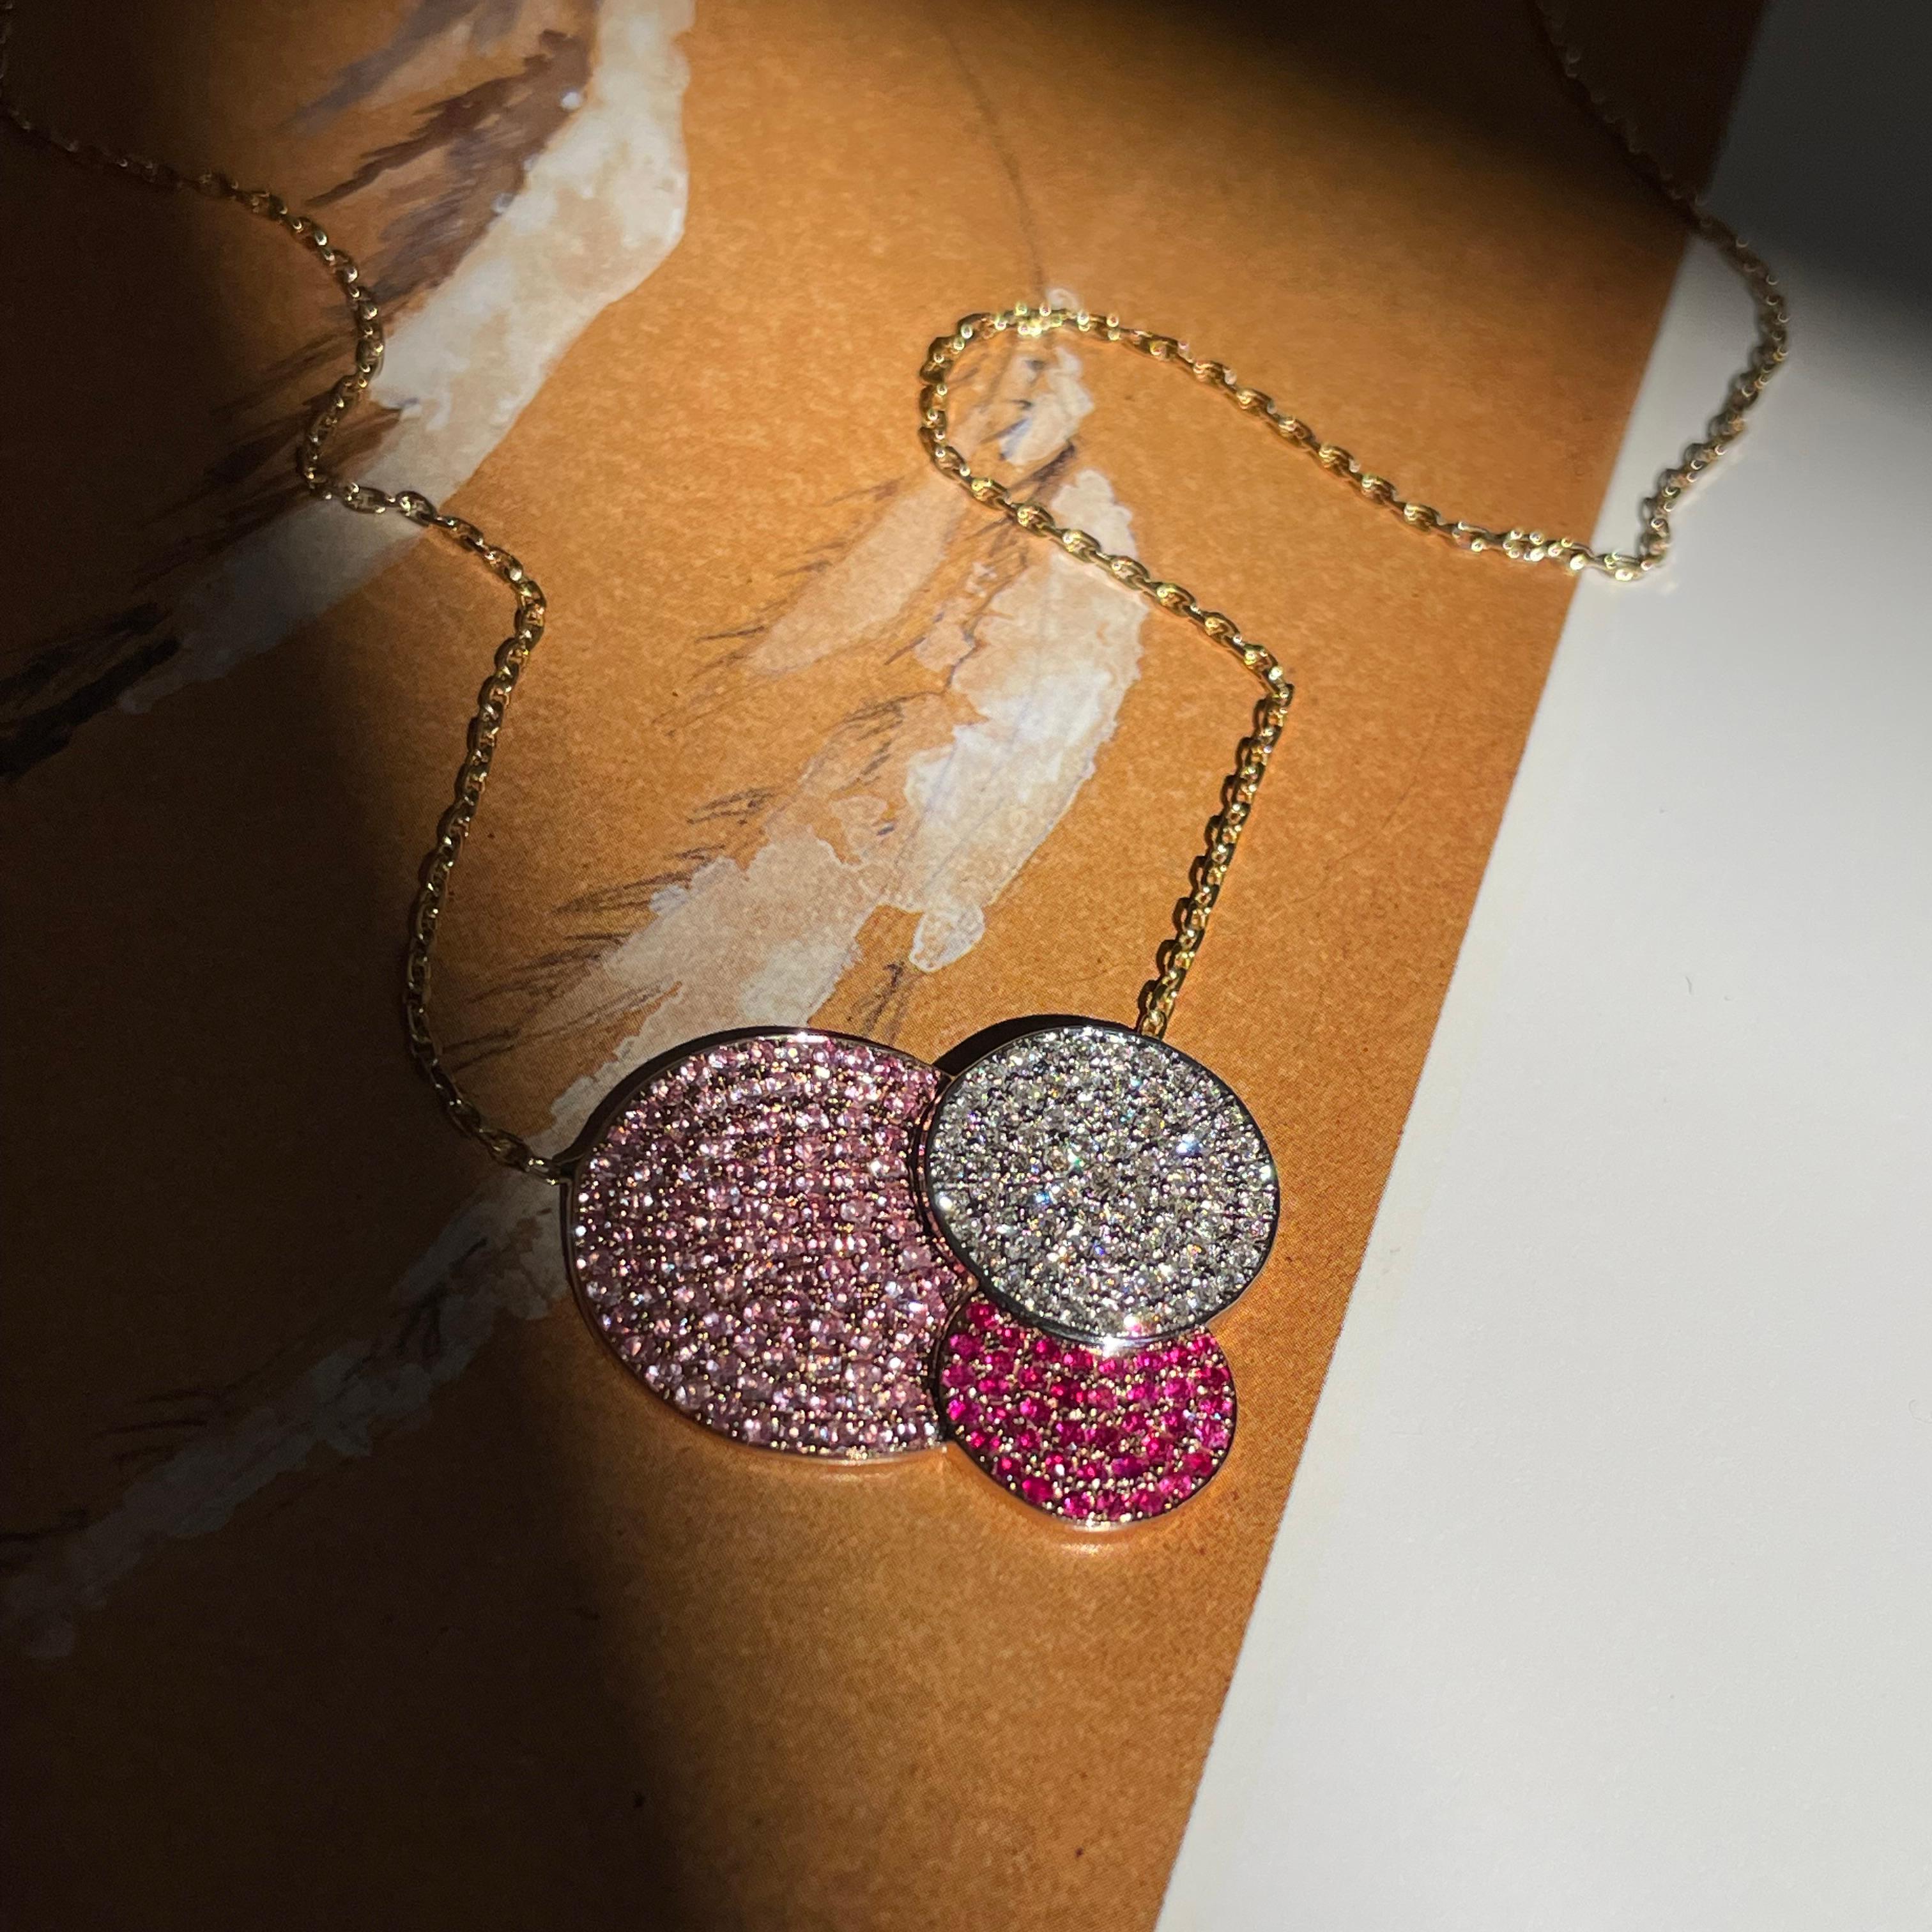 Elegant 18kt rose gold necklace from Ralph Masri's '1919' Bauhaus-inspired collection, set with diamonds (0.66cts), rubies (0.41cts) and pink sapphires (1.04cts). 